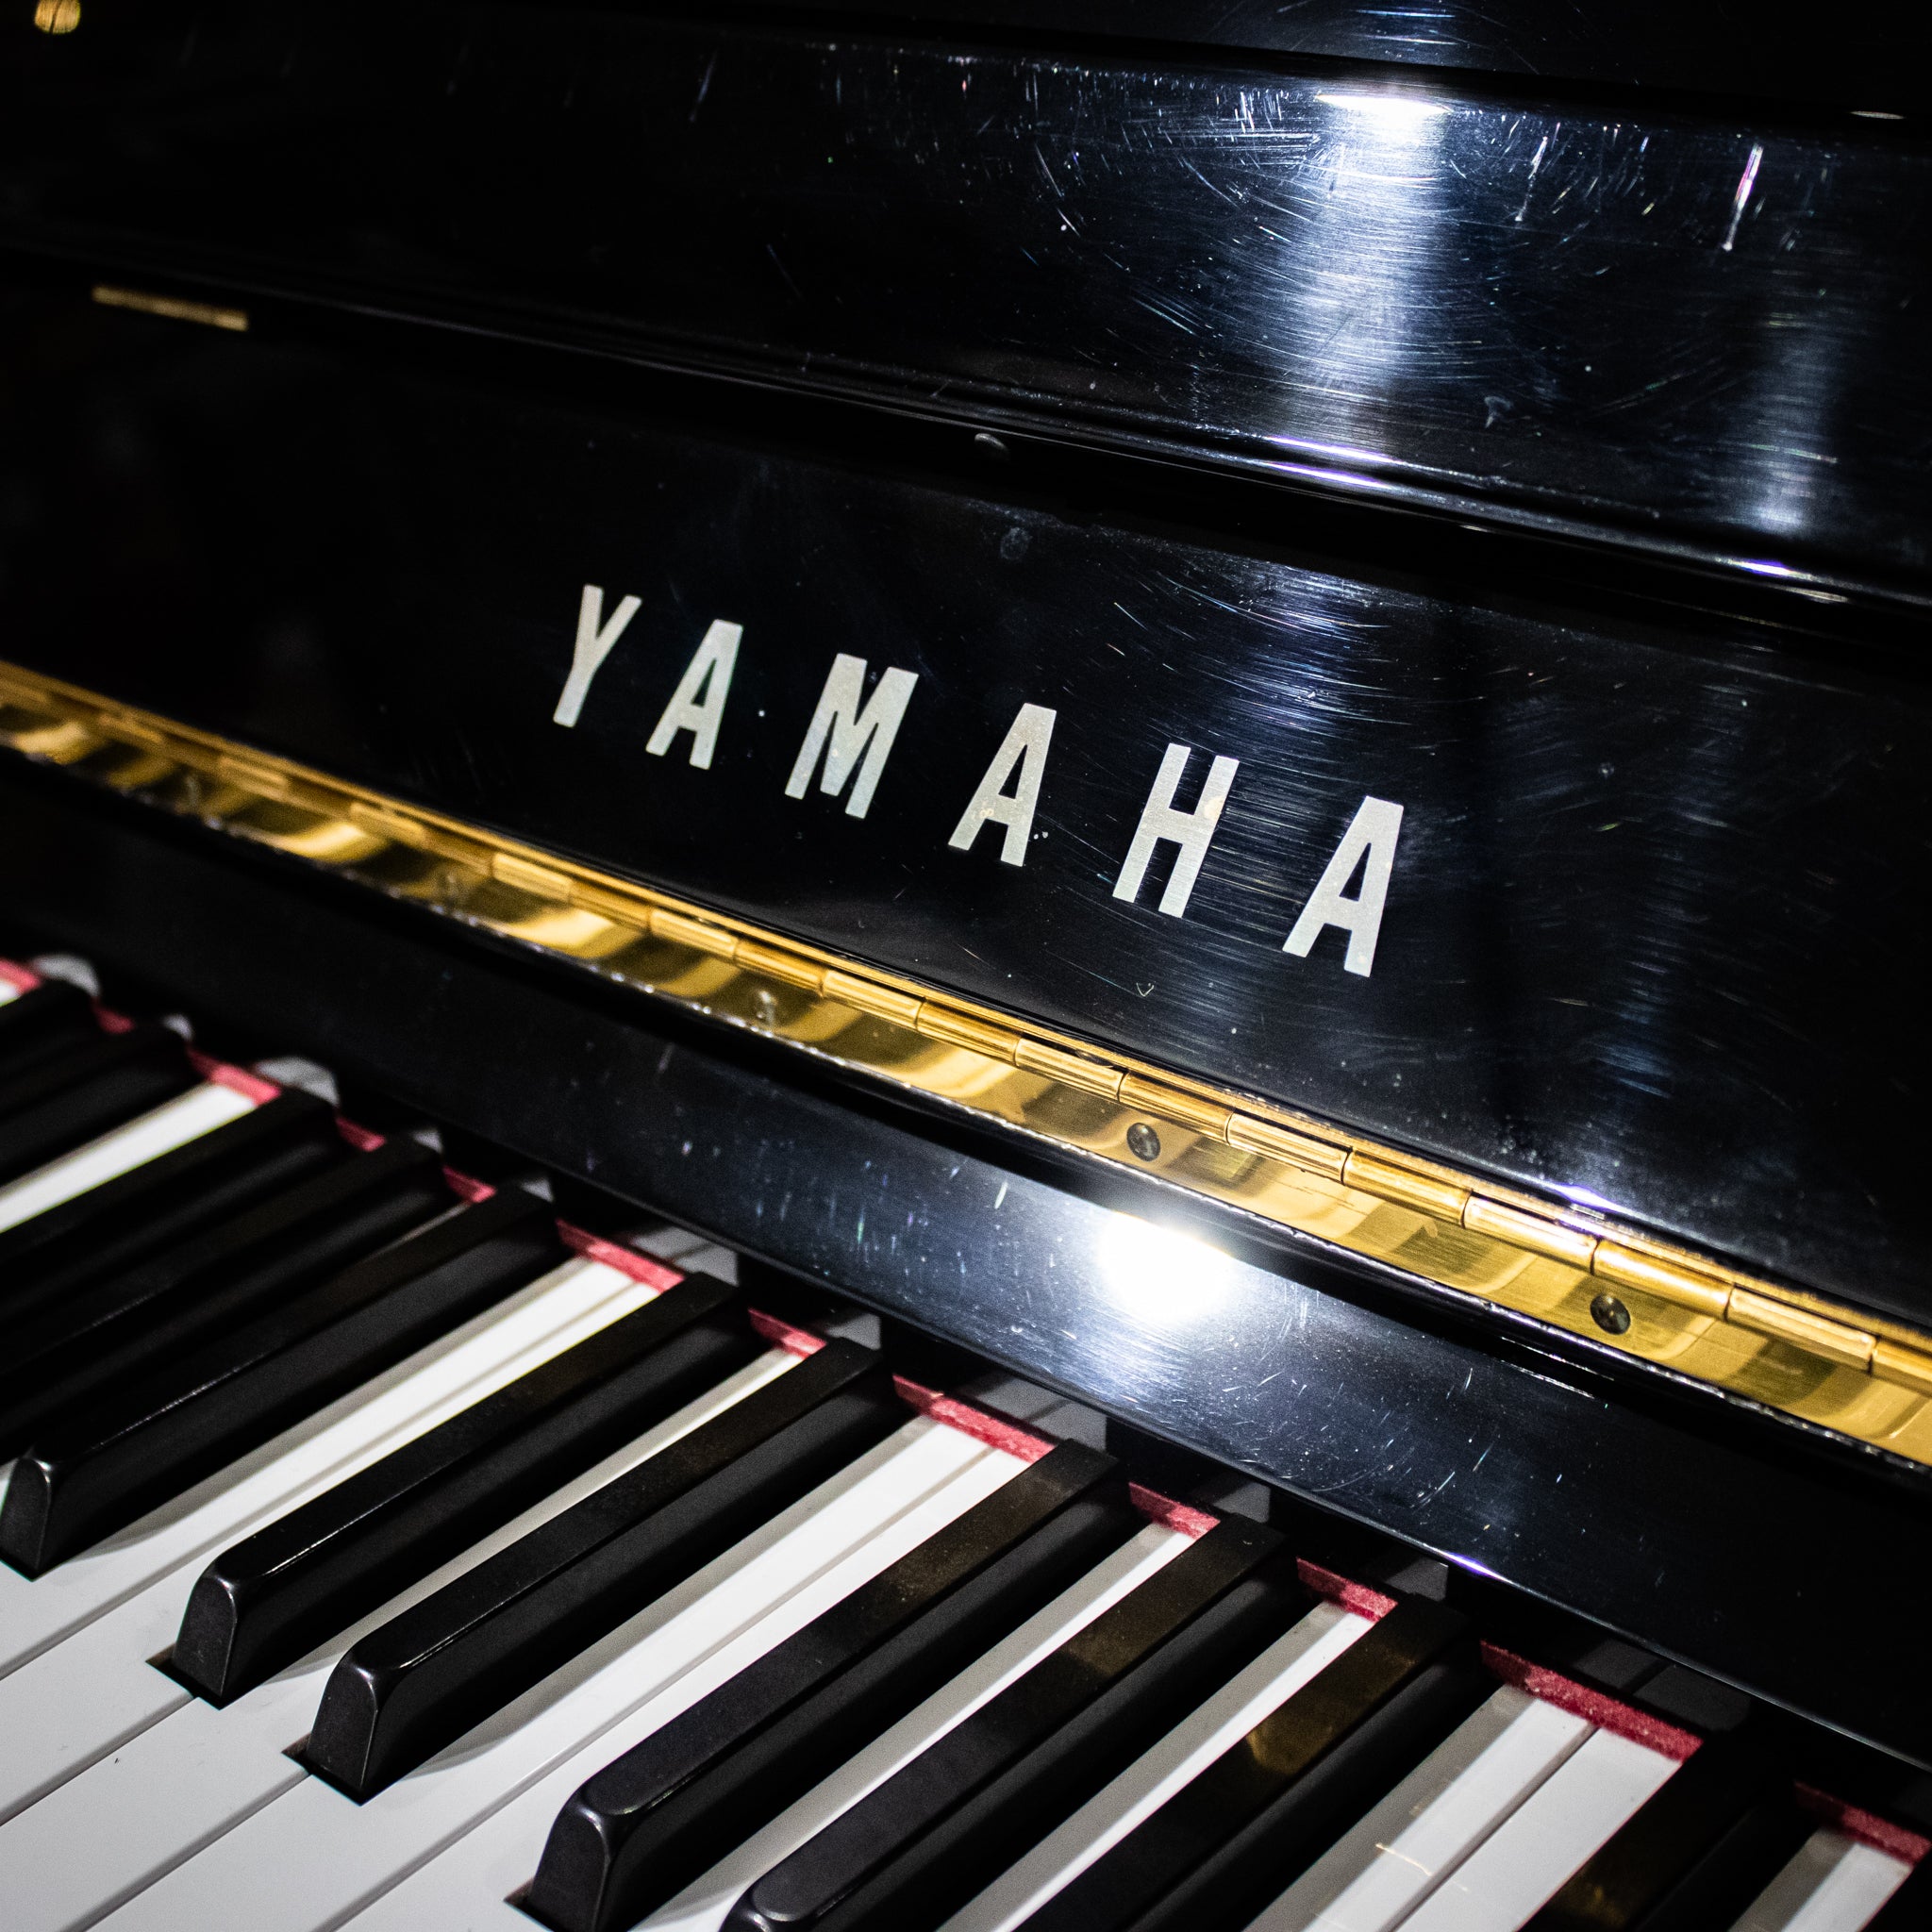 Yamaha U3 Certified Reconditioned Upright Piano (Secondhand) - 5466510 Sold!